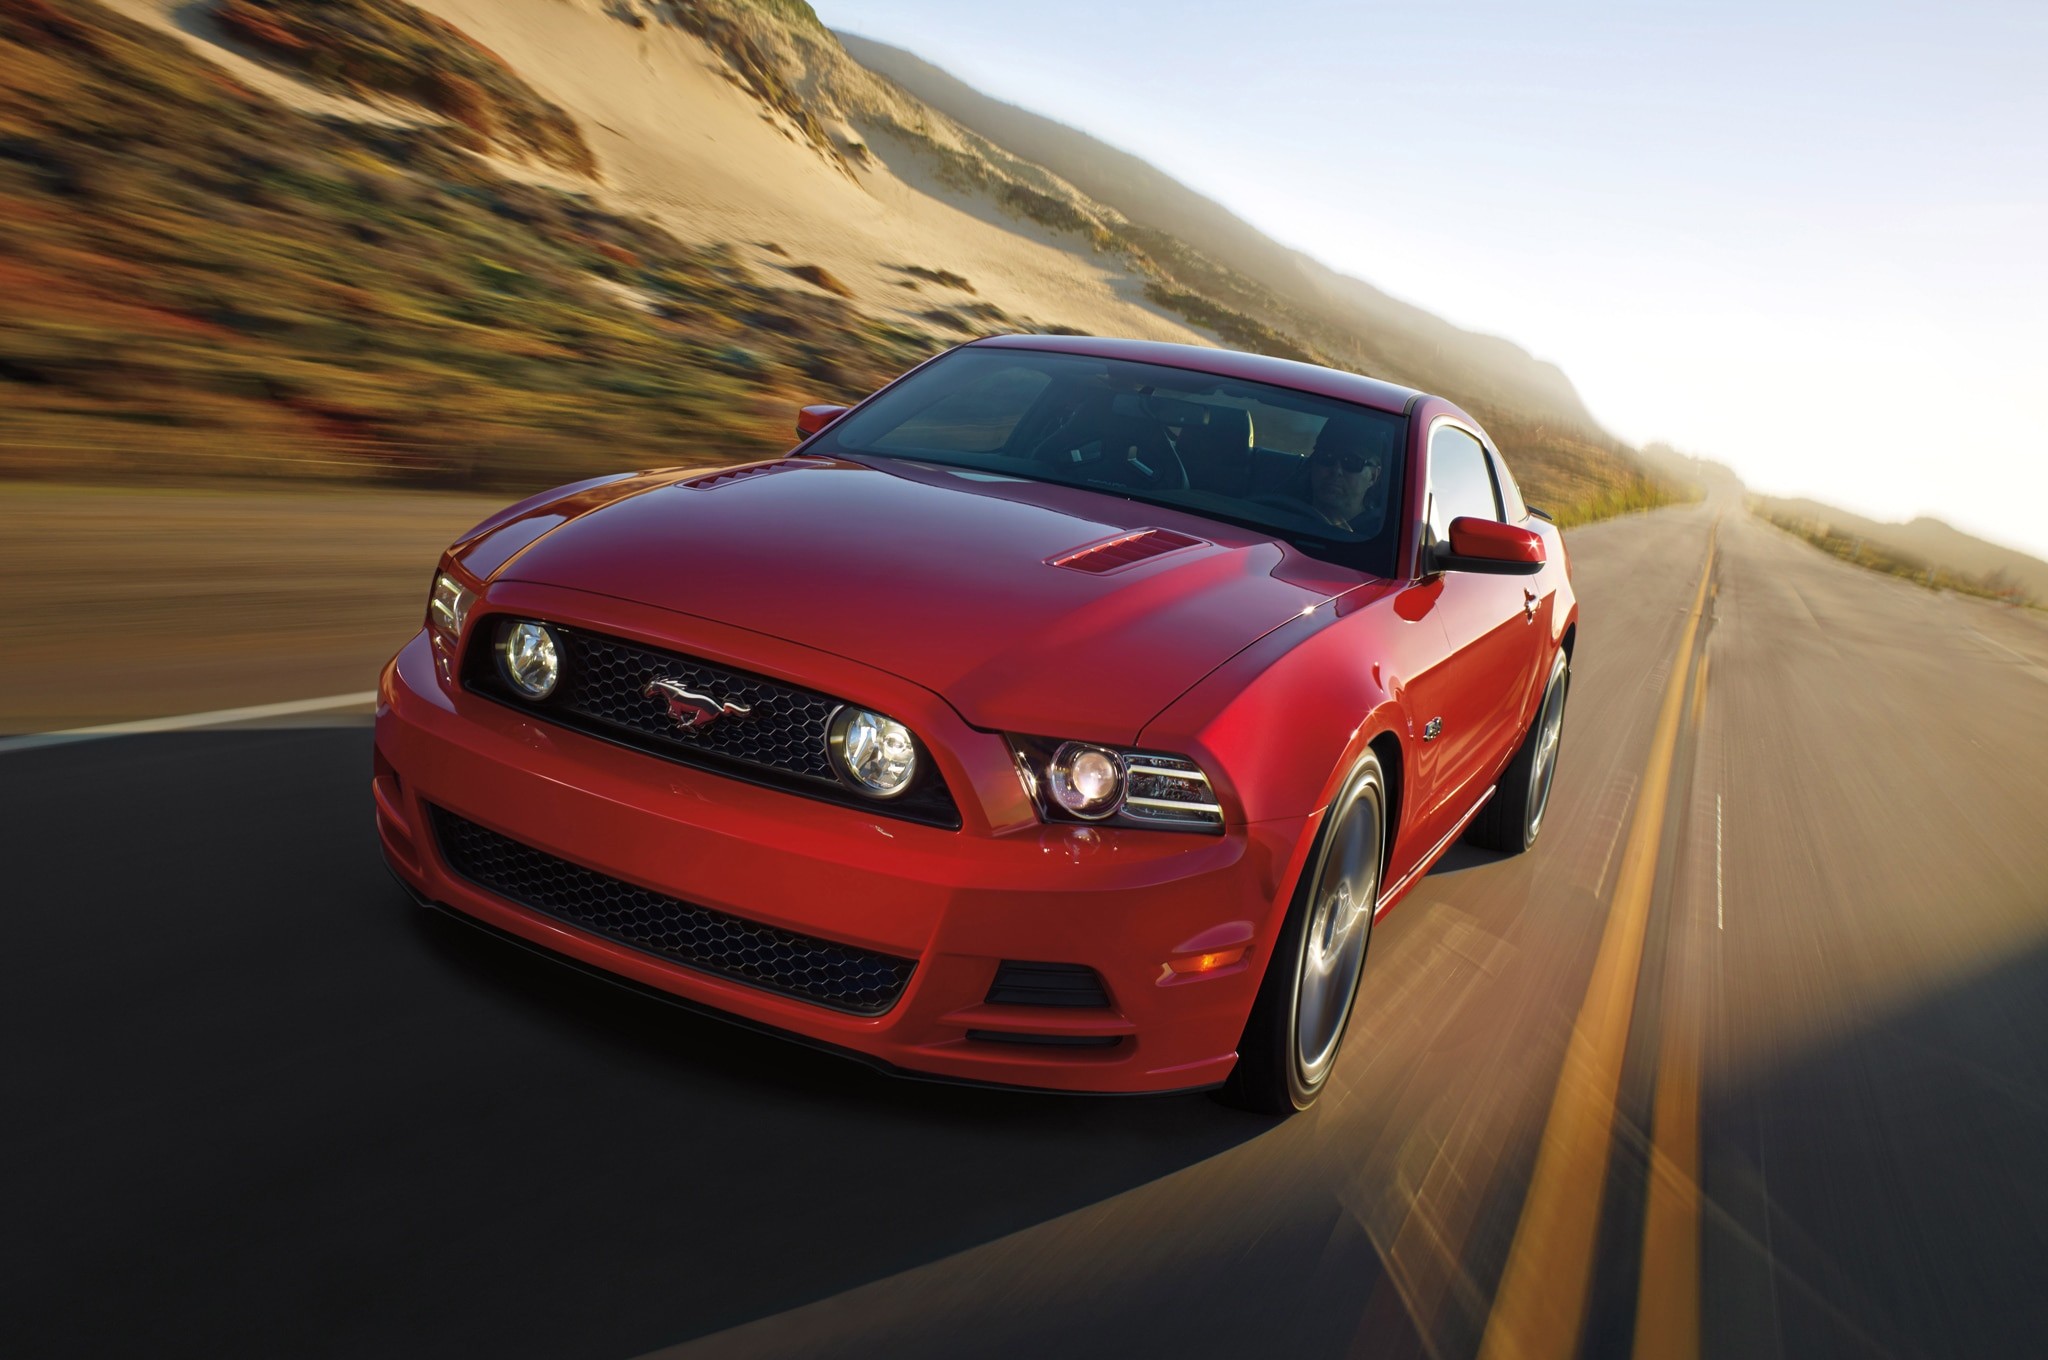 2014 FORD MUSTANG